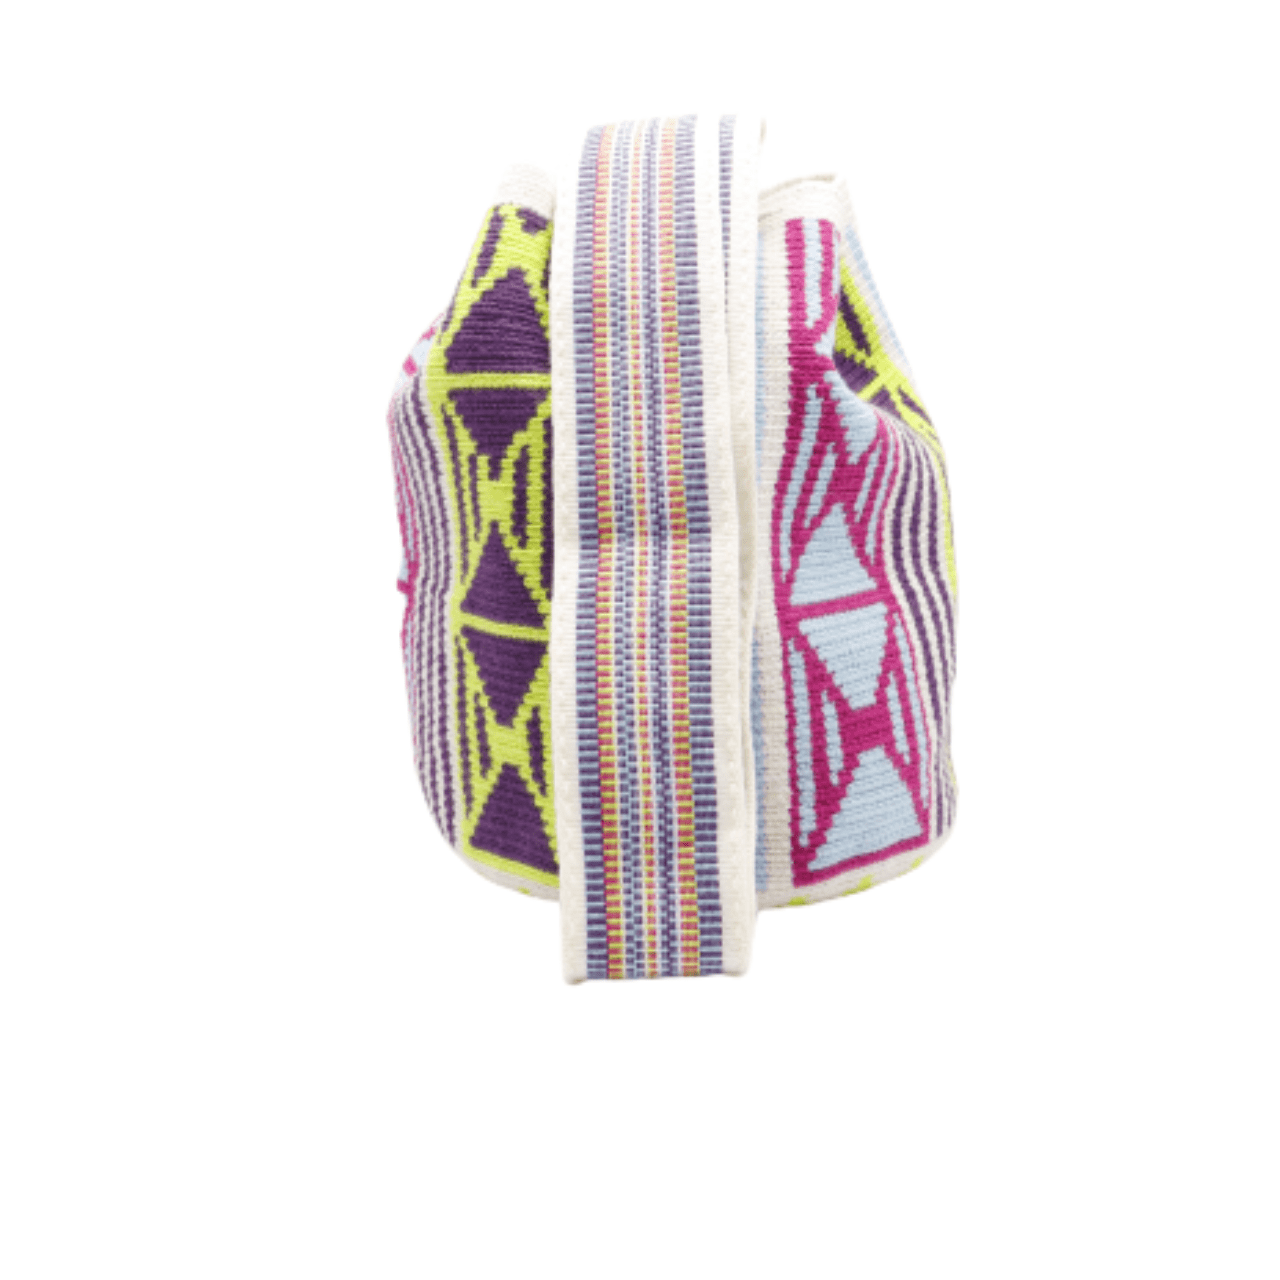 Emilia Wayuu Mochila- Stunning Blend of Plum, Blue, Moss Green, and Sky Blue over a Beige Background - Discover Colombian Artistry